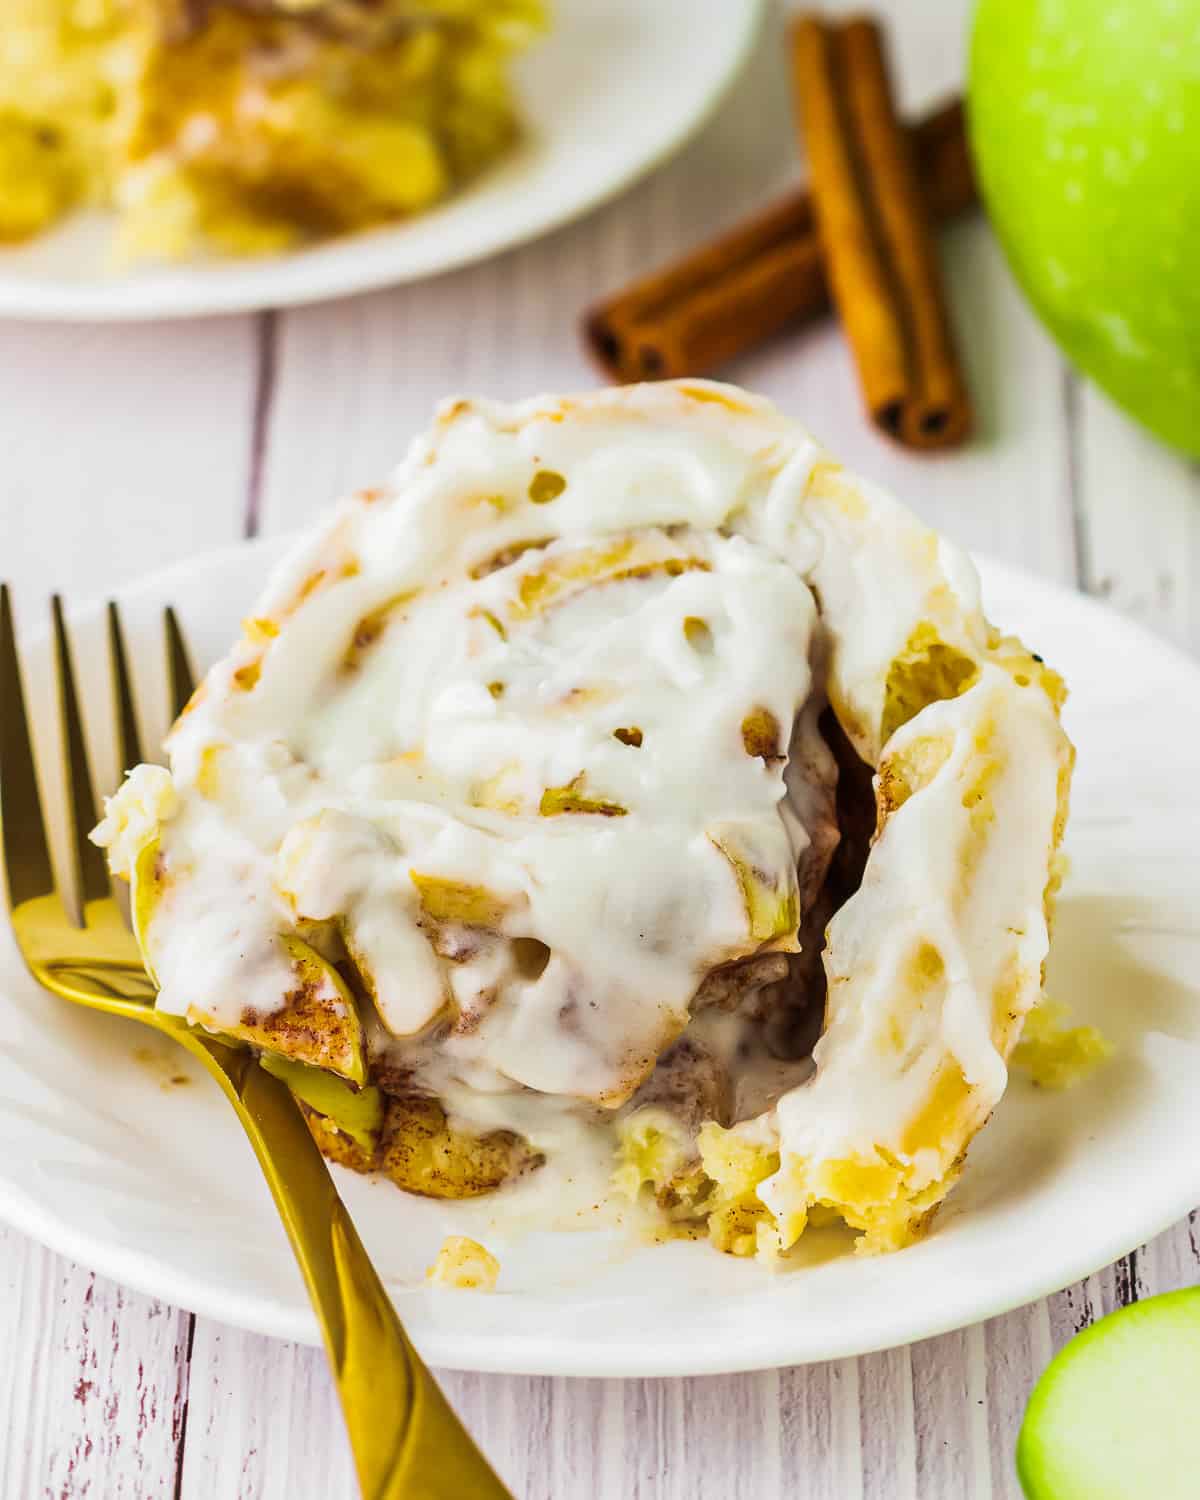 apple cinnamon rolls with cream cheese icing on a plate.